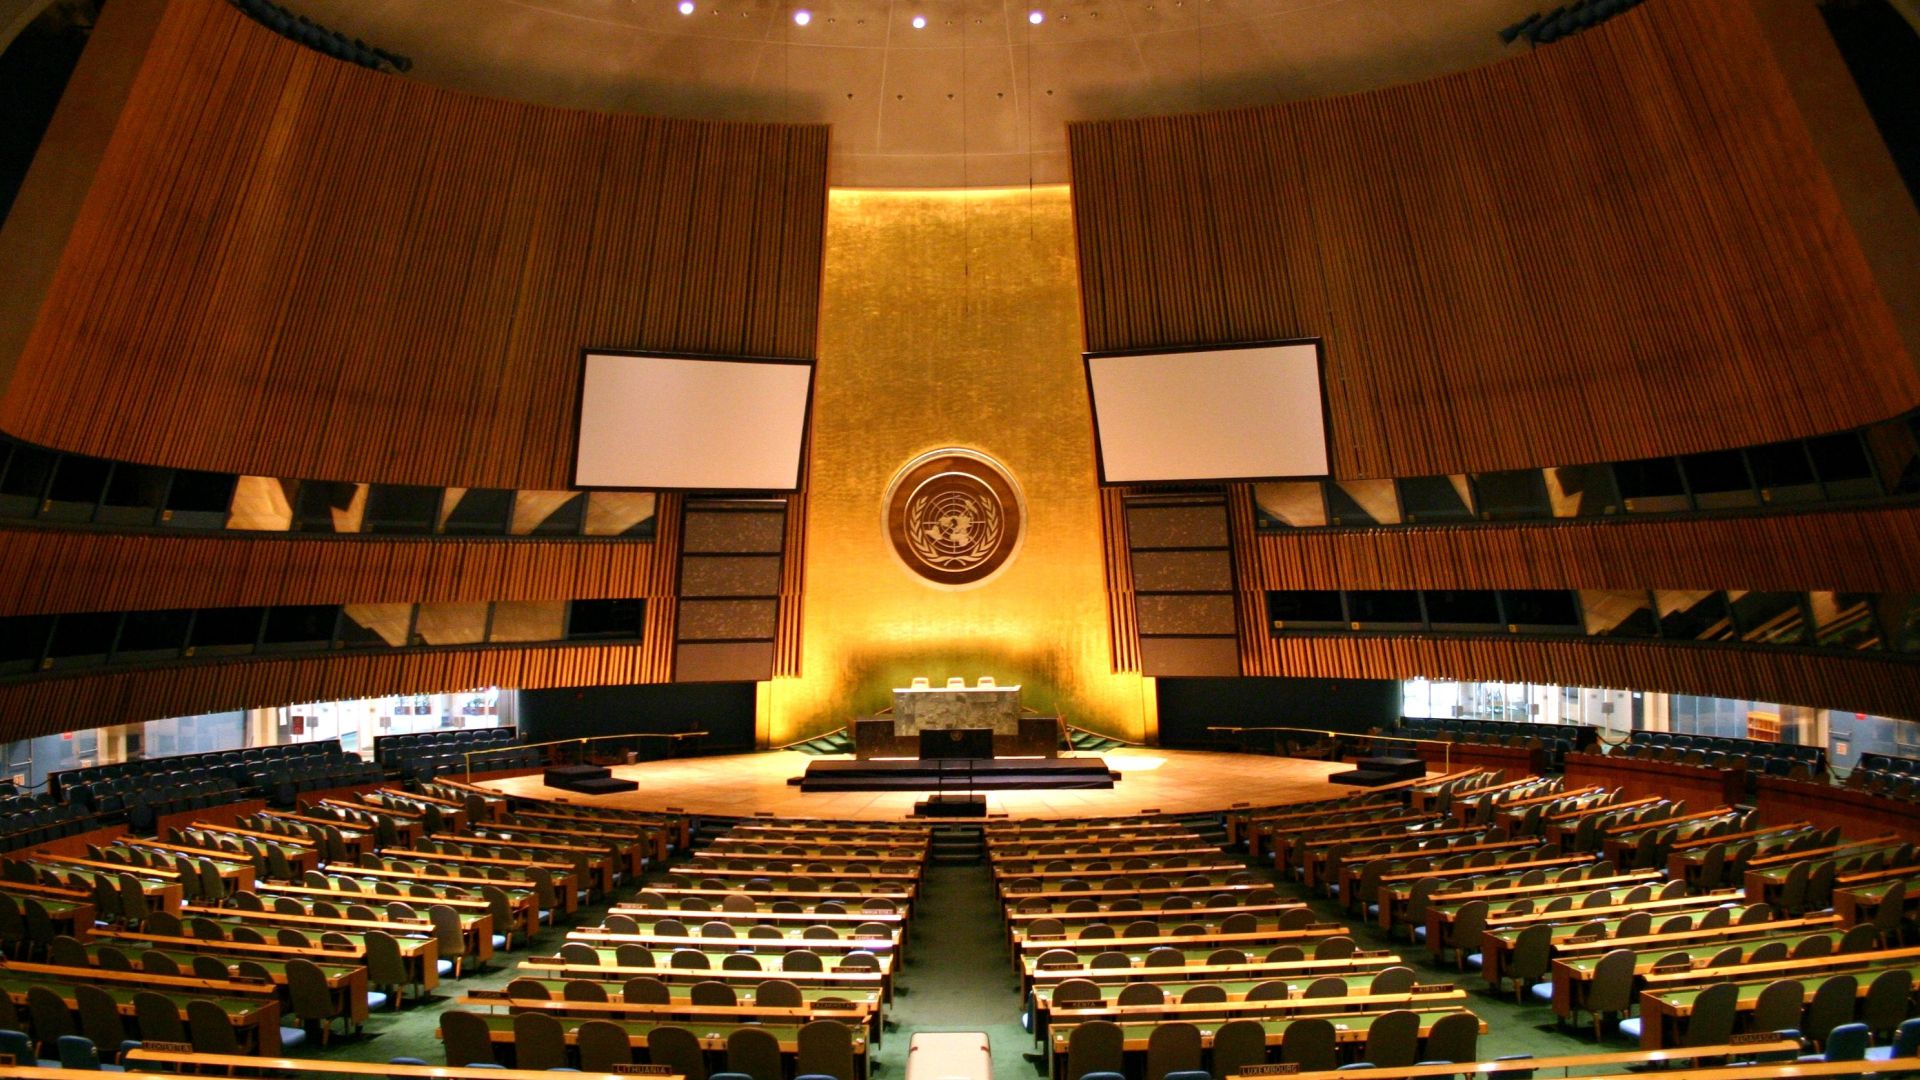 The United Nations' History, Organization, & Functions